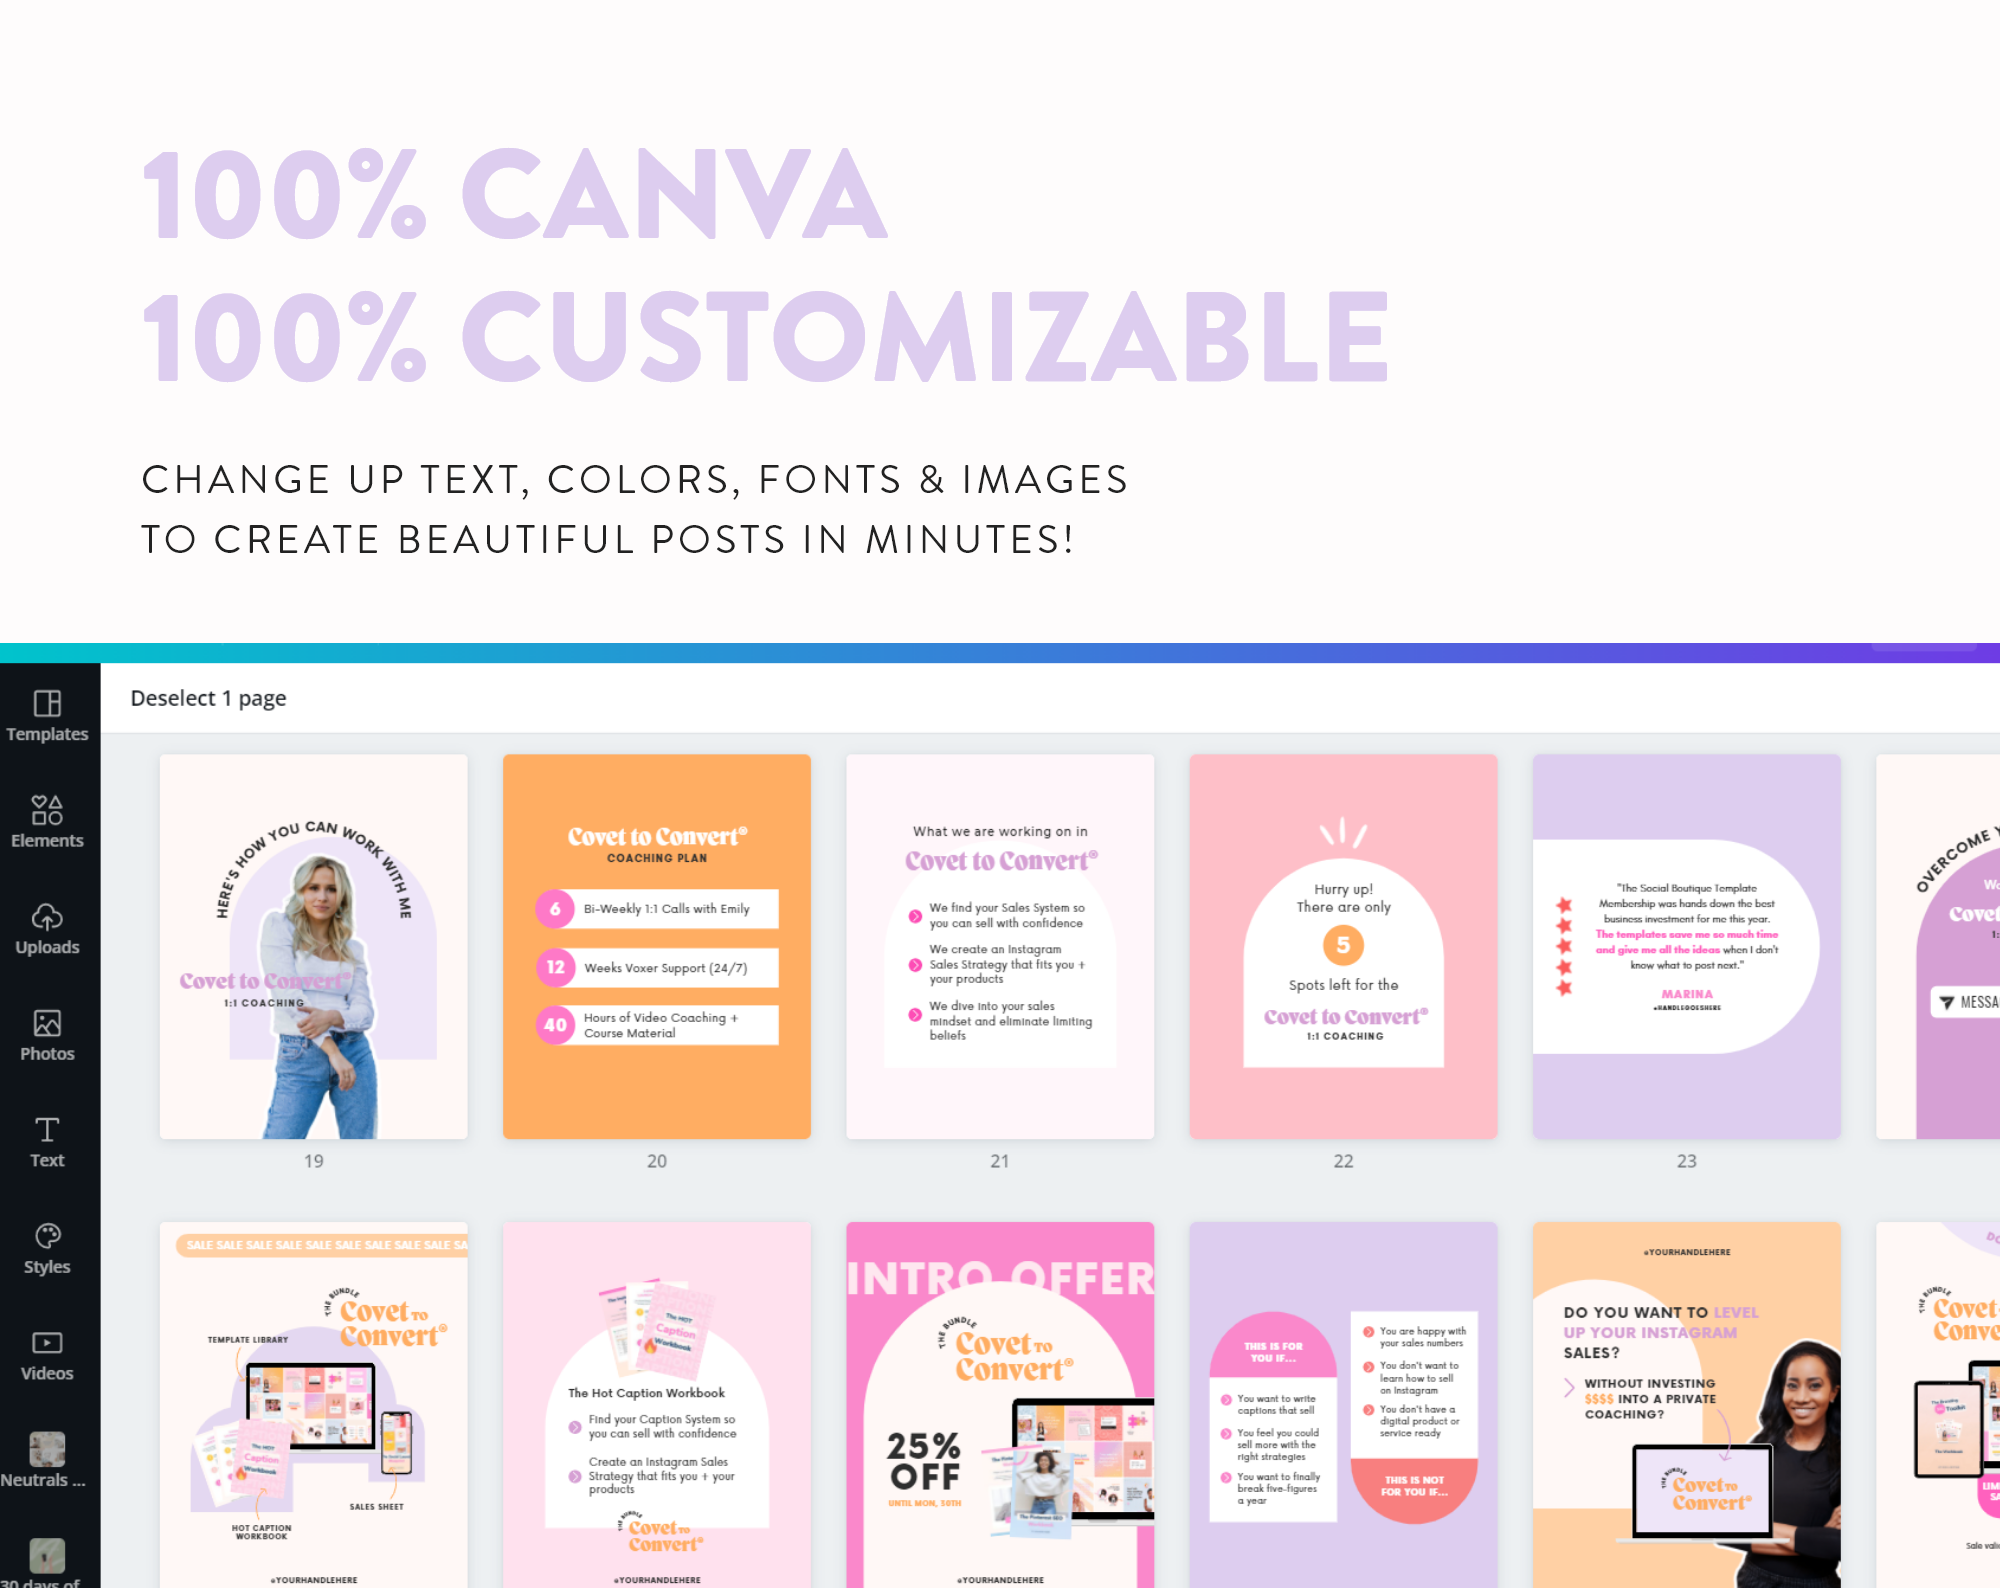 black-friday-instagram-sales-templates-for-canva-customizable-8